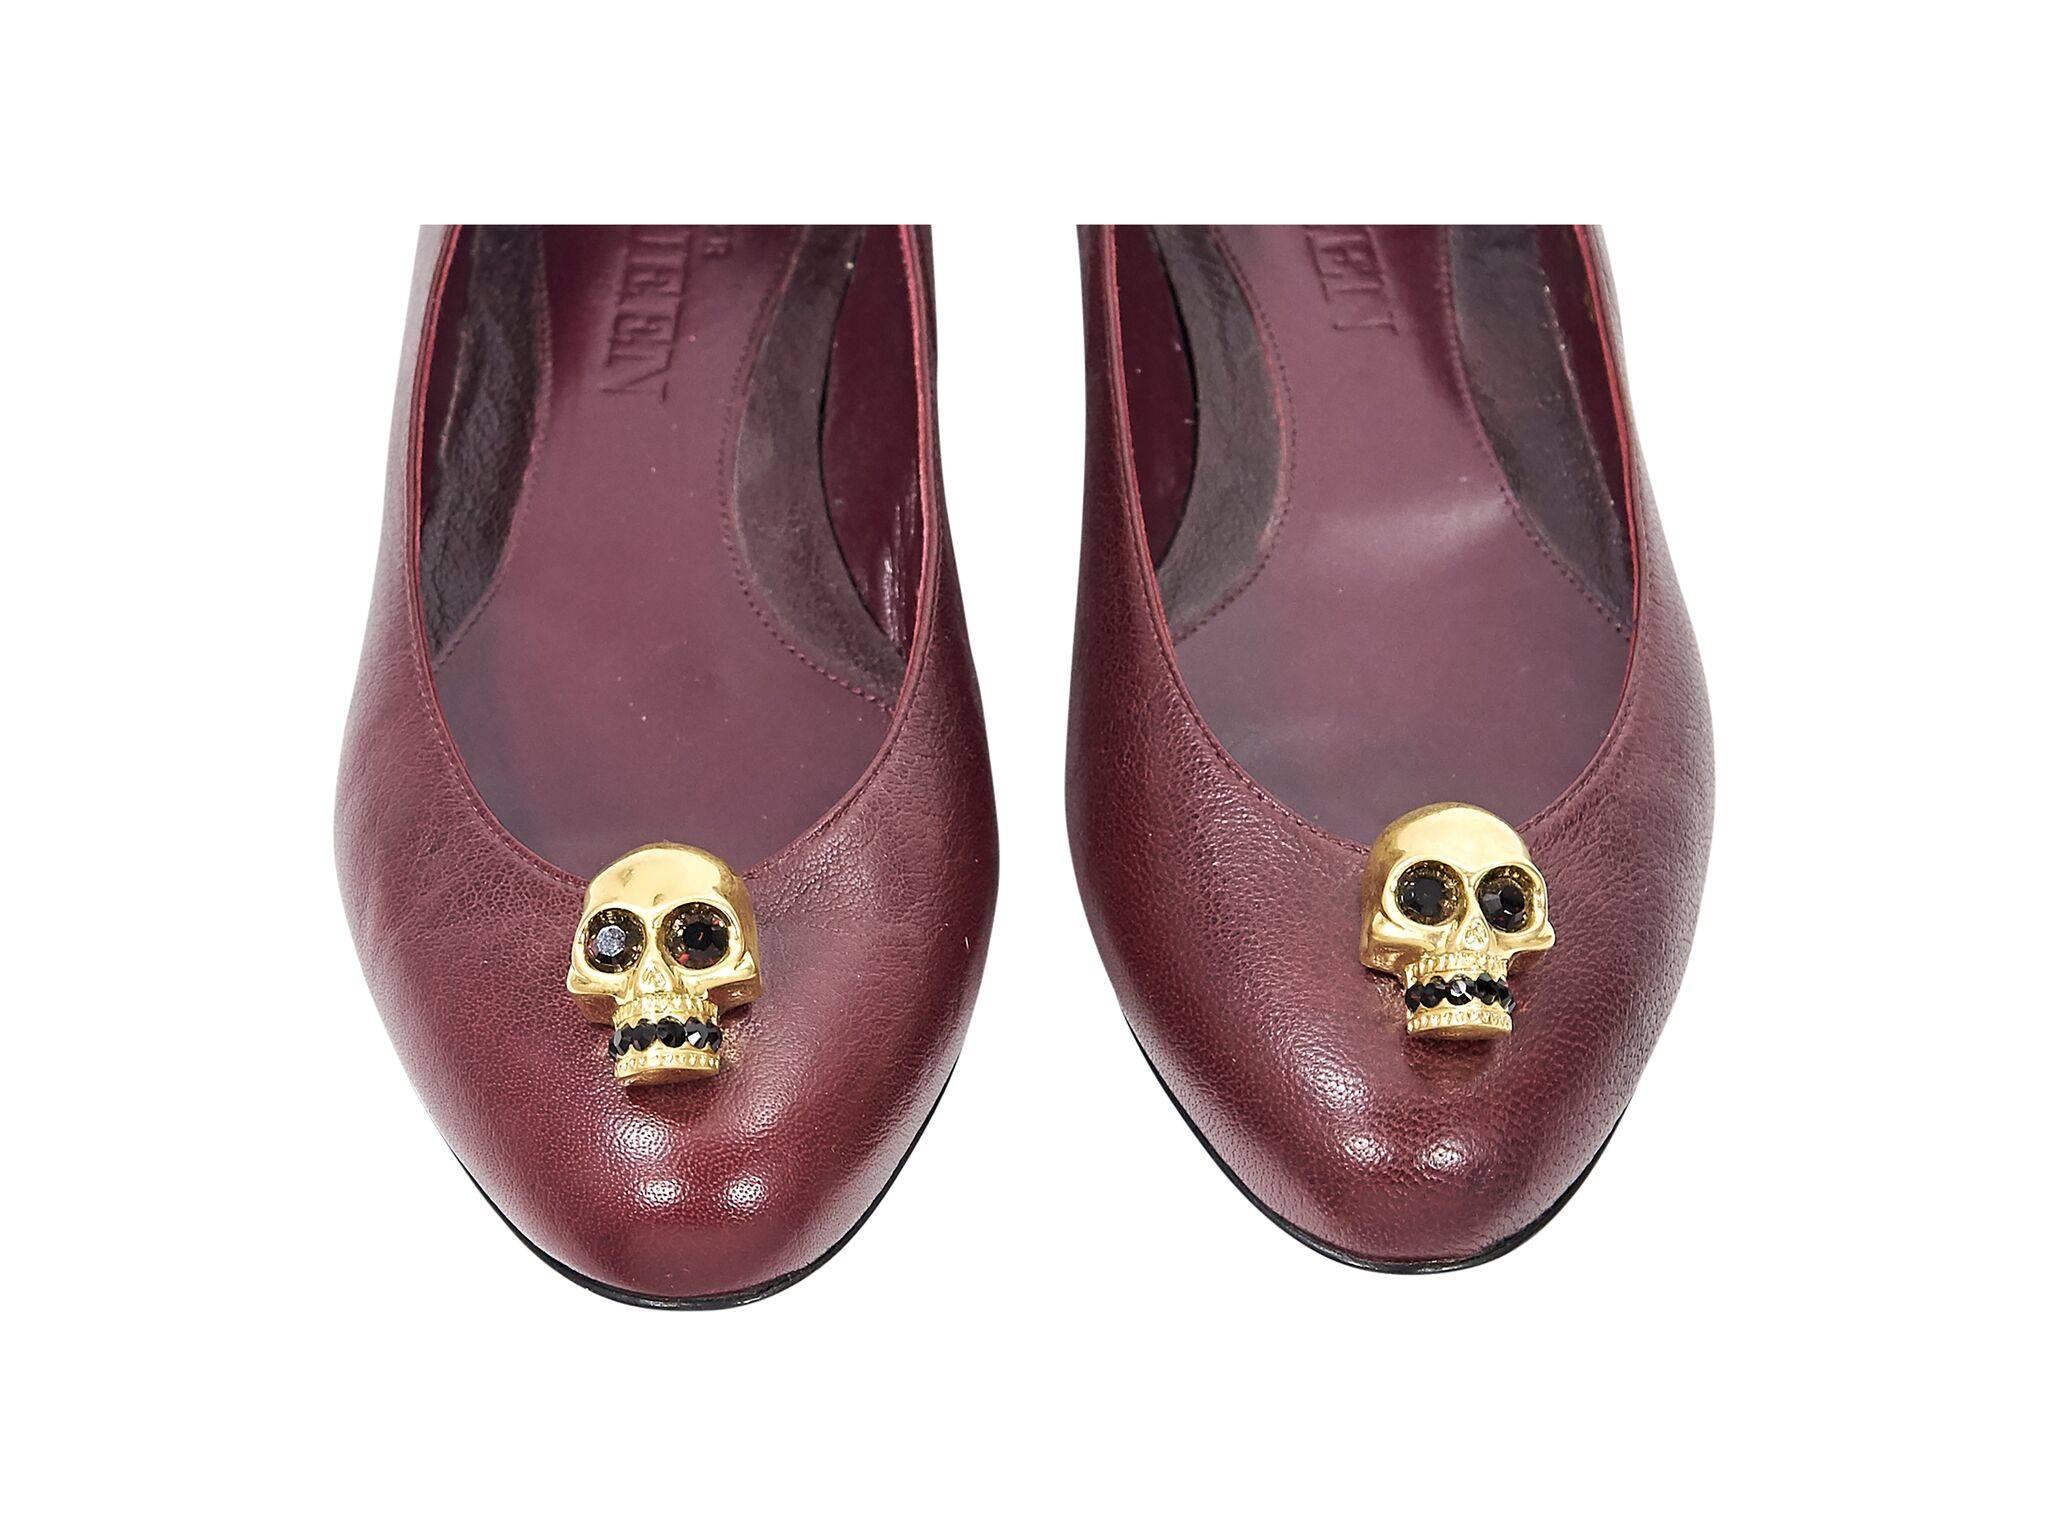 Product details:  Red leather ballet flats by Alexander McQueen.  Goldtone logo skull detail.  Round toe.  Slip-on style.
Condition: Pre-owned. Very good.
Est. Retail $738